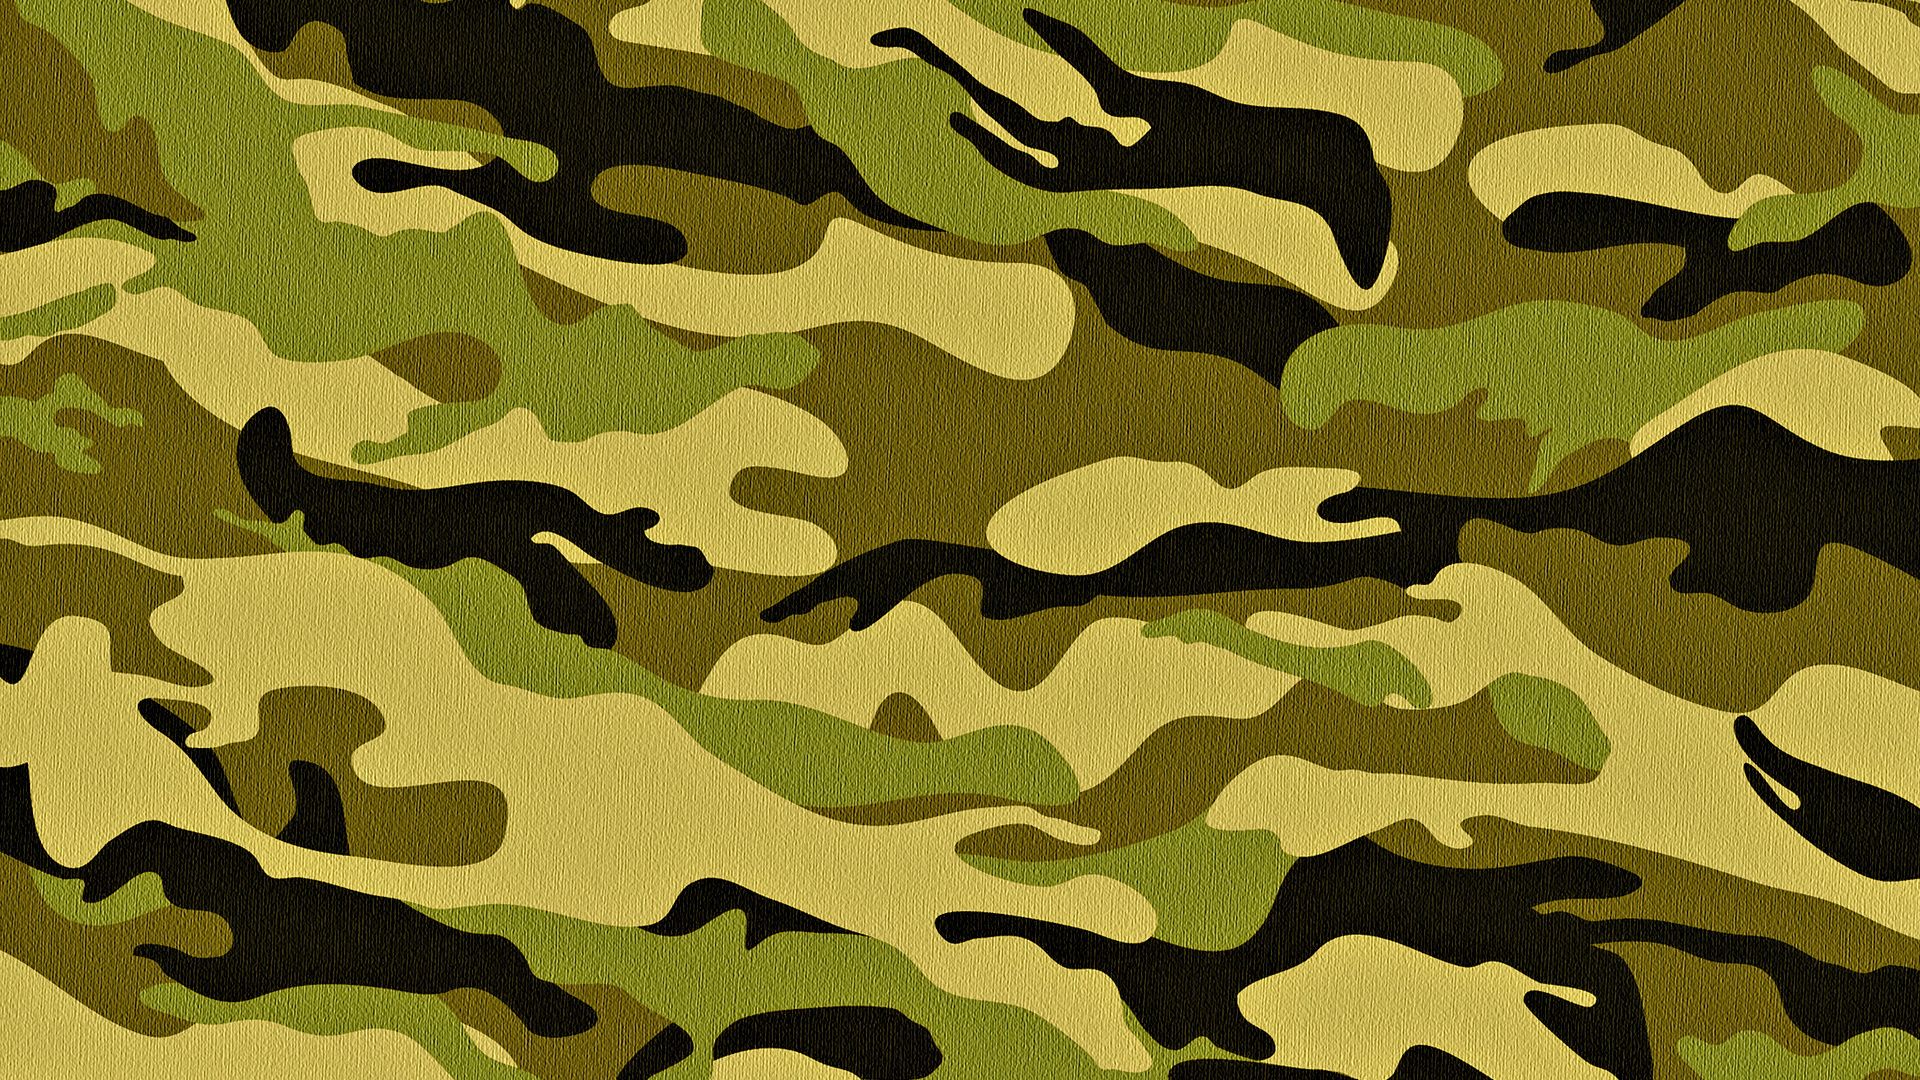 Low Poly Heros And Villians Pack. Camo wallpaper, Camouflage wallpaper, Army wallpaper